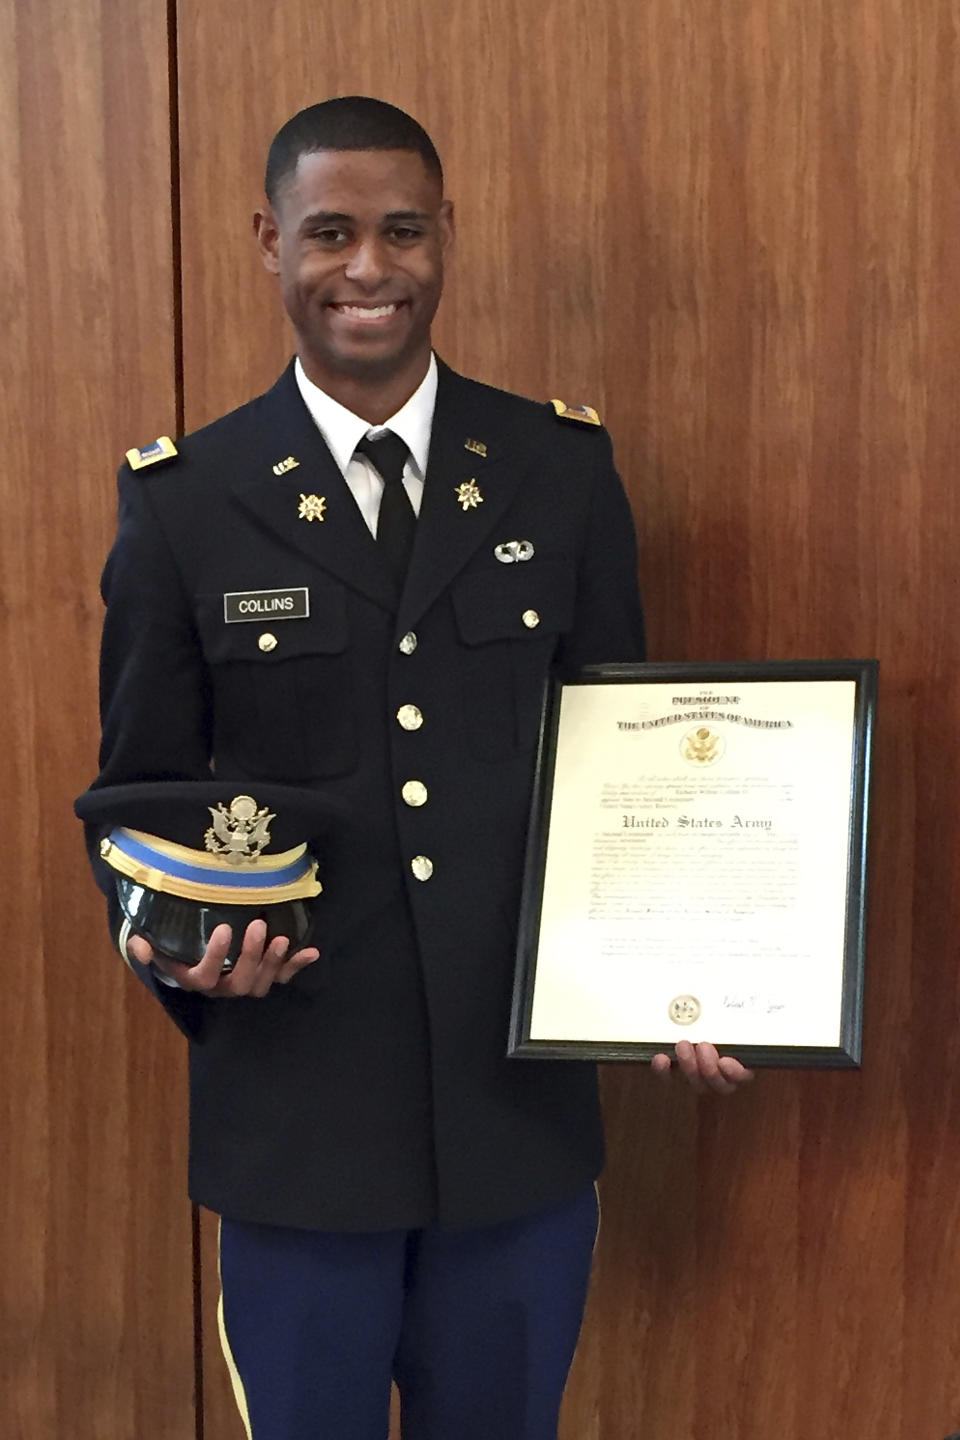 This undated file photo provided by the family of Richard Collins III shows him in his United States Army uniform. A judge has dismissed a hate crime charge against Sean Urbanski, who is charged of fatally stabbing Collins, a black college student at the University of Maryland. The murder trial will continue Wednesday for Urbanski. A defense attorney and a state's attorney's office spokeswoman said Tuesday that a judge agreed to acquit Urbanski of the hate crime charge. Jurors in the case are expected to begin deliberating on Wednesday. (Richard W. Collins Jr. via AP)